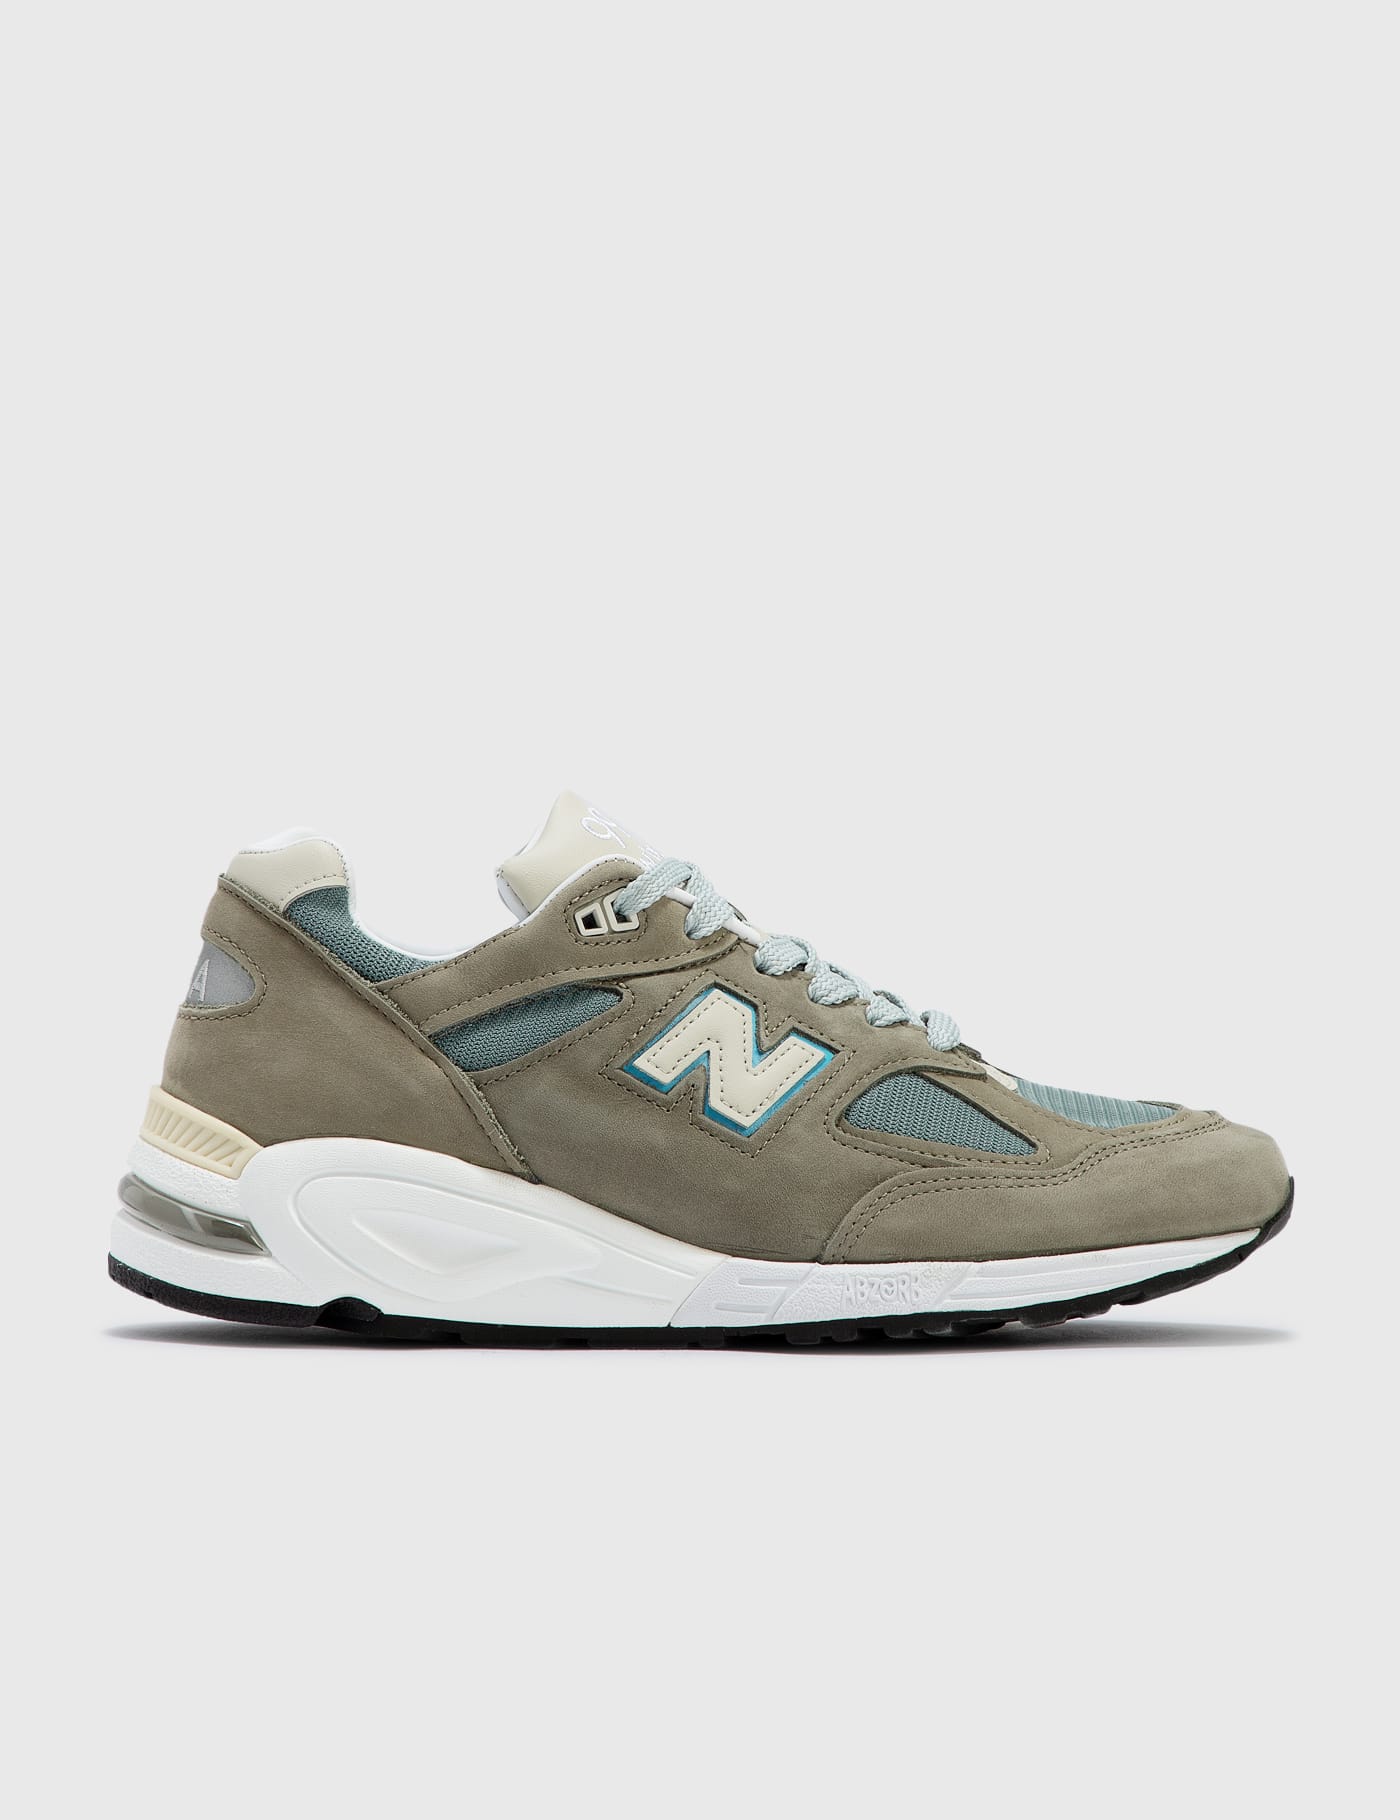 New Balance - M990KBM2 | HBX - Globally Curated Fashion and ...